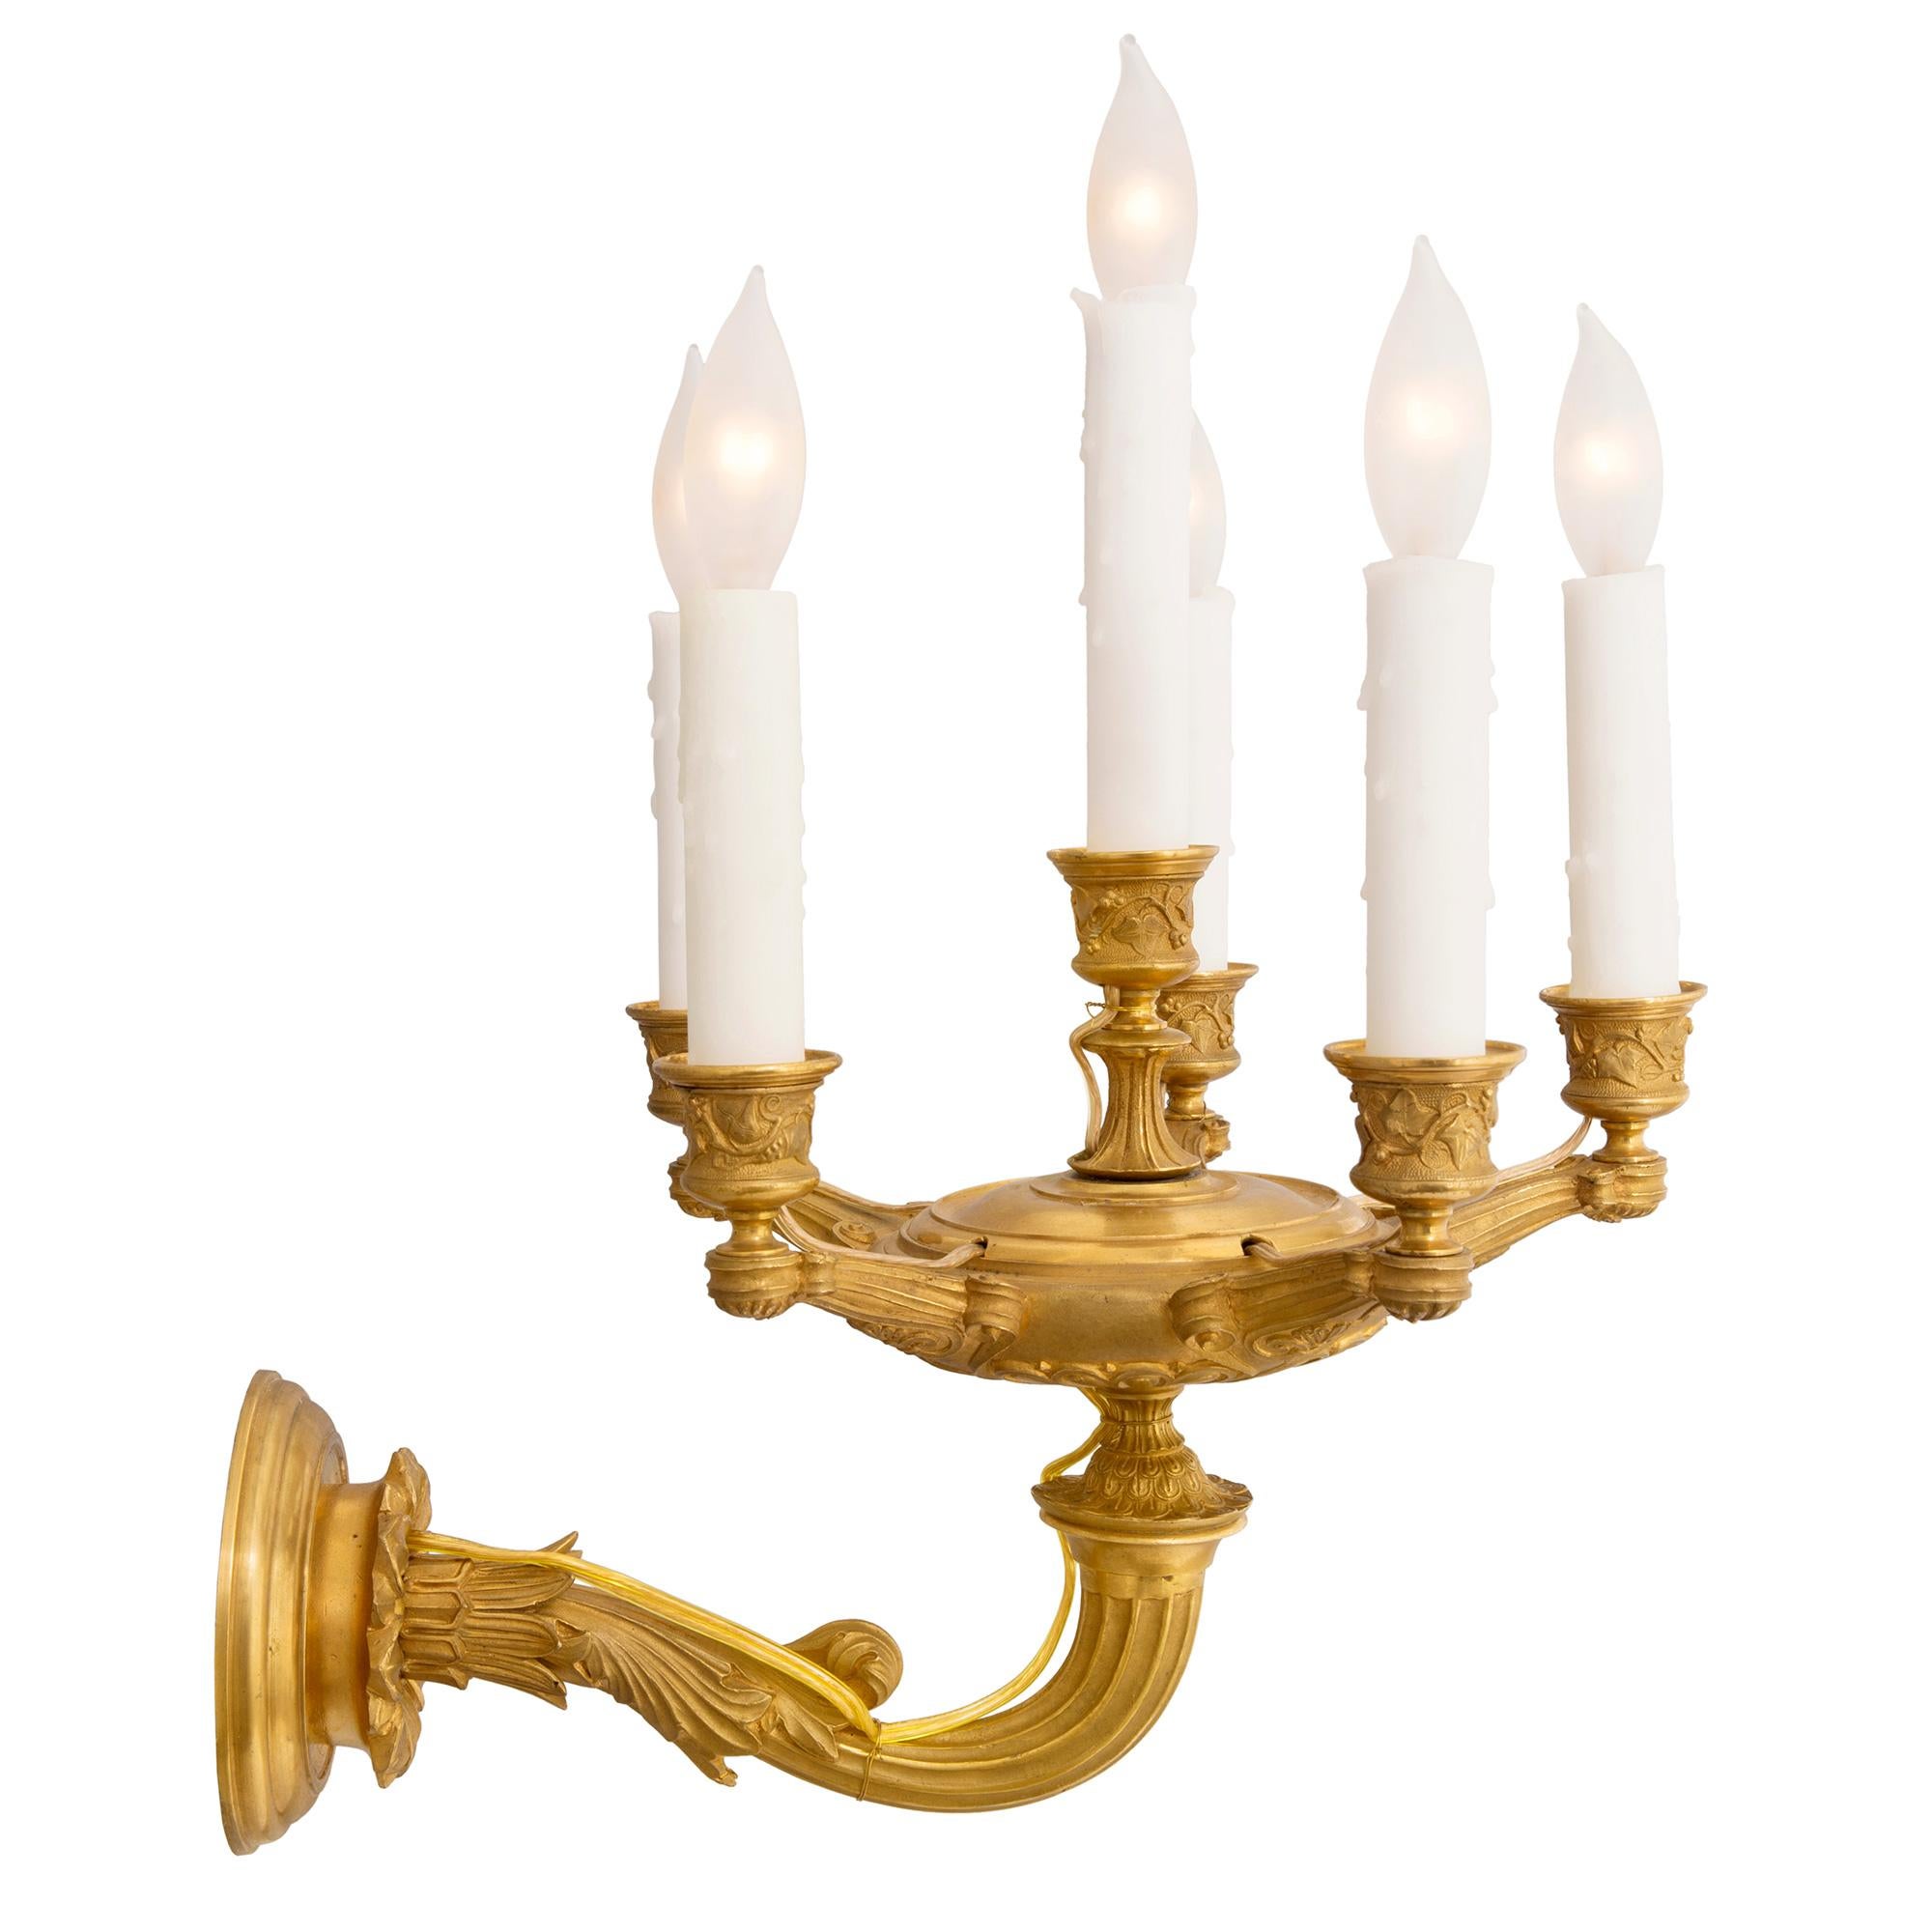 Pair of French Mid-19th Century Empire Style Six-Arm Ormolu Sconces In Good Condition For Sale In West Palm Beach, FL